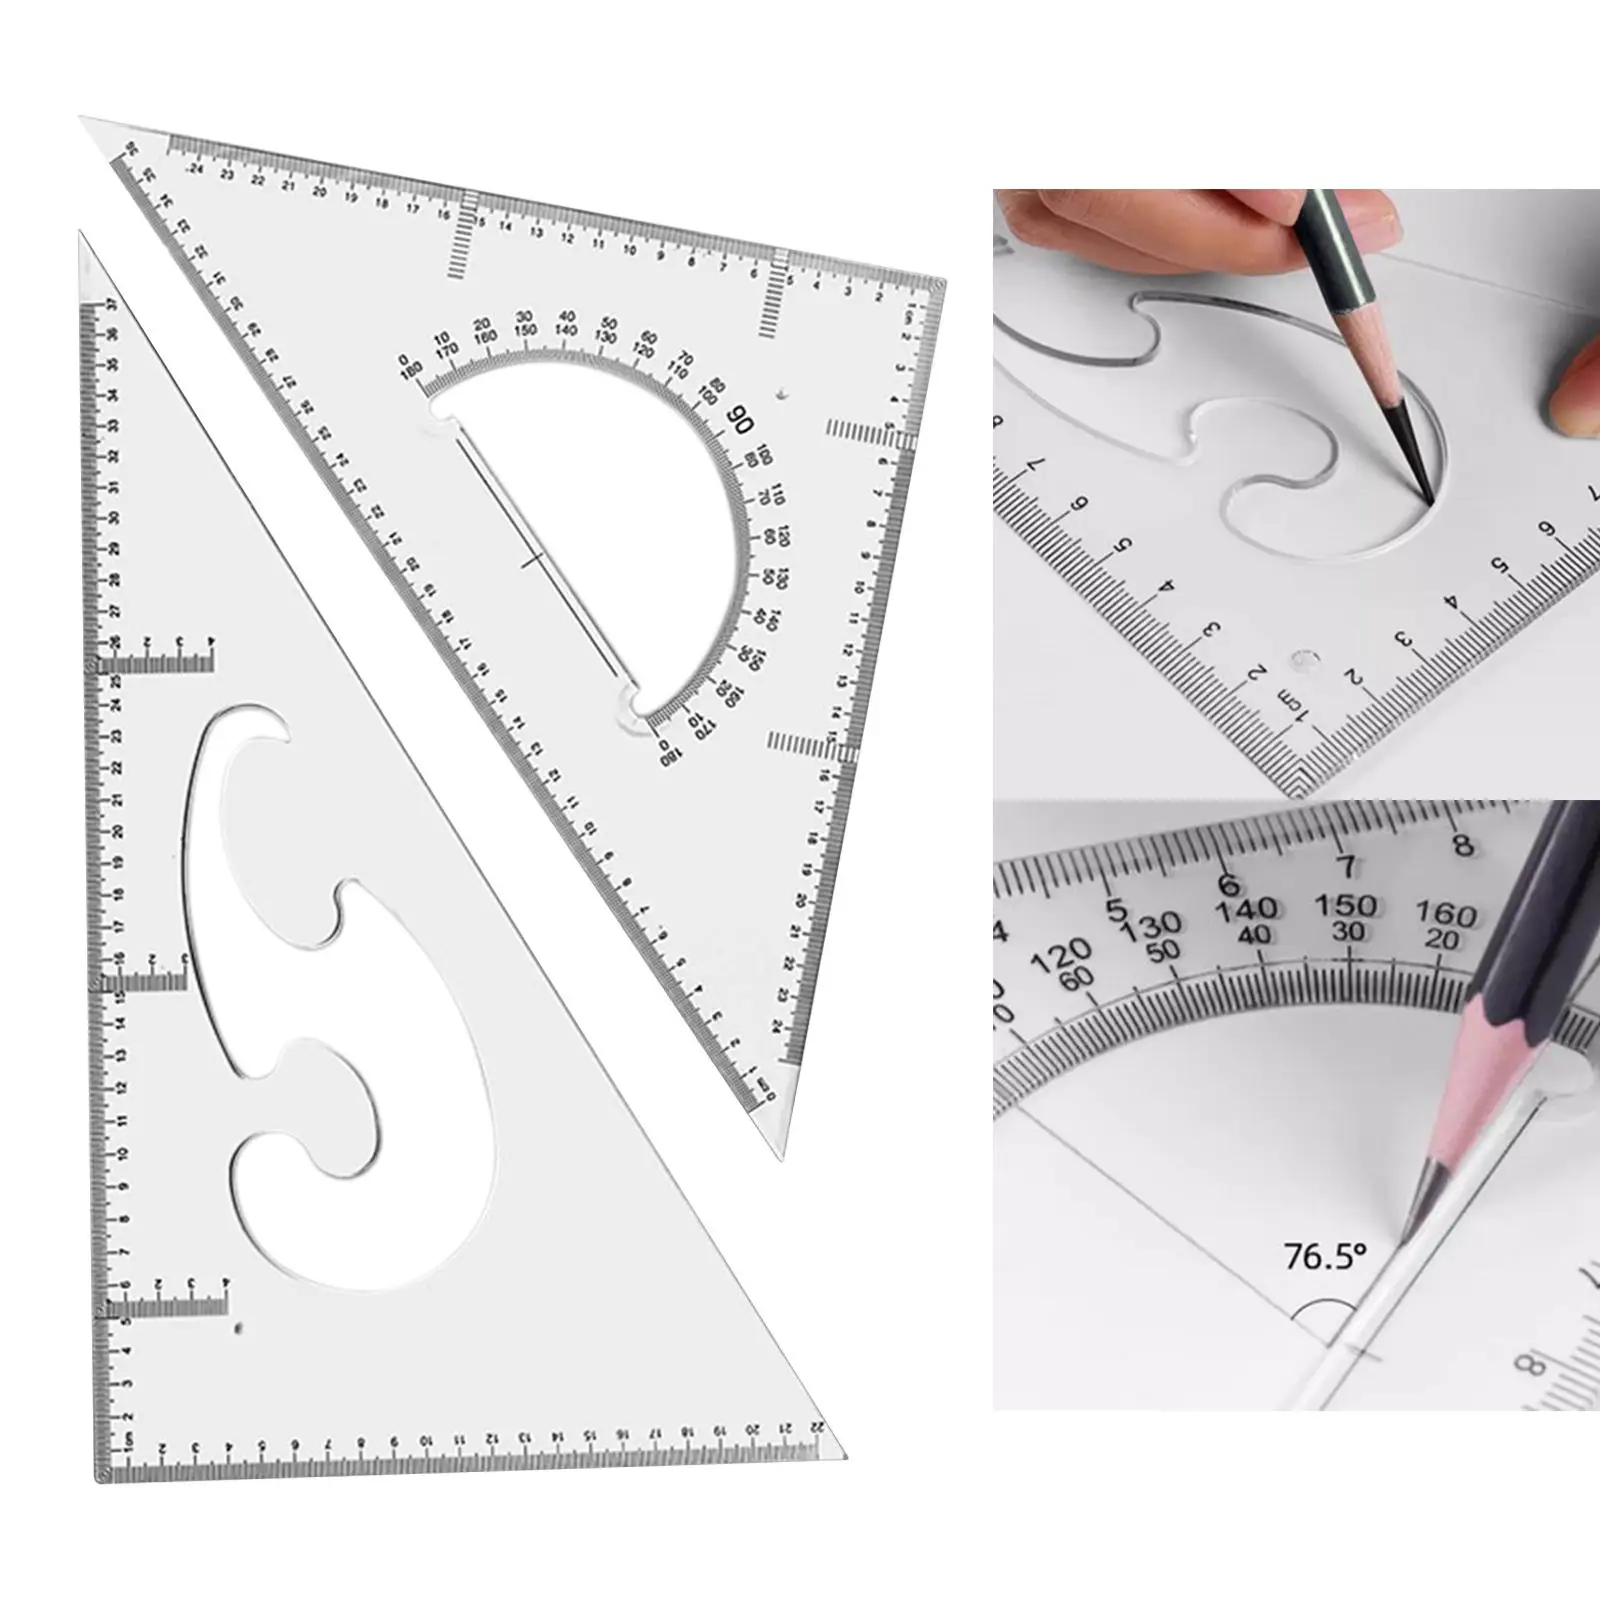 2 Pieces Triangle Ruler Square Accuracy Durable Multifunctional Measuring Tool for Architect Designer Carpentry Engineer Artists